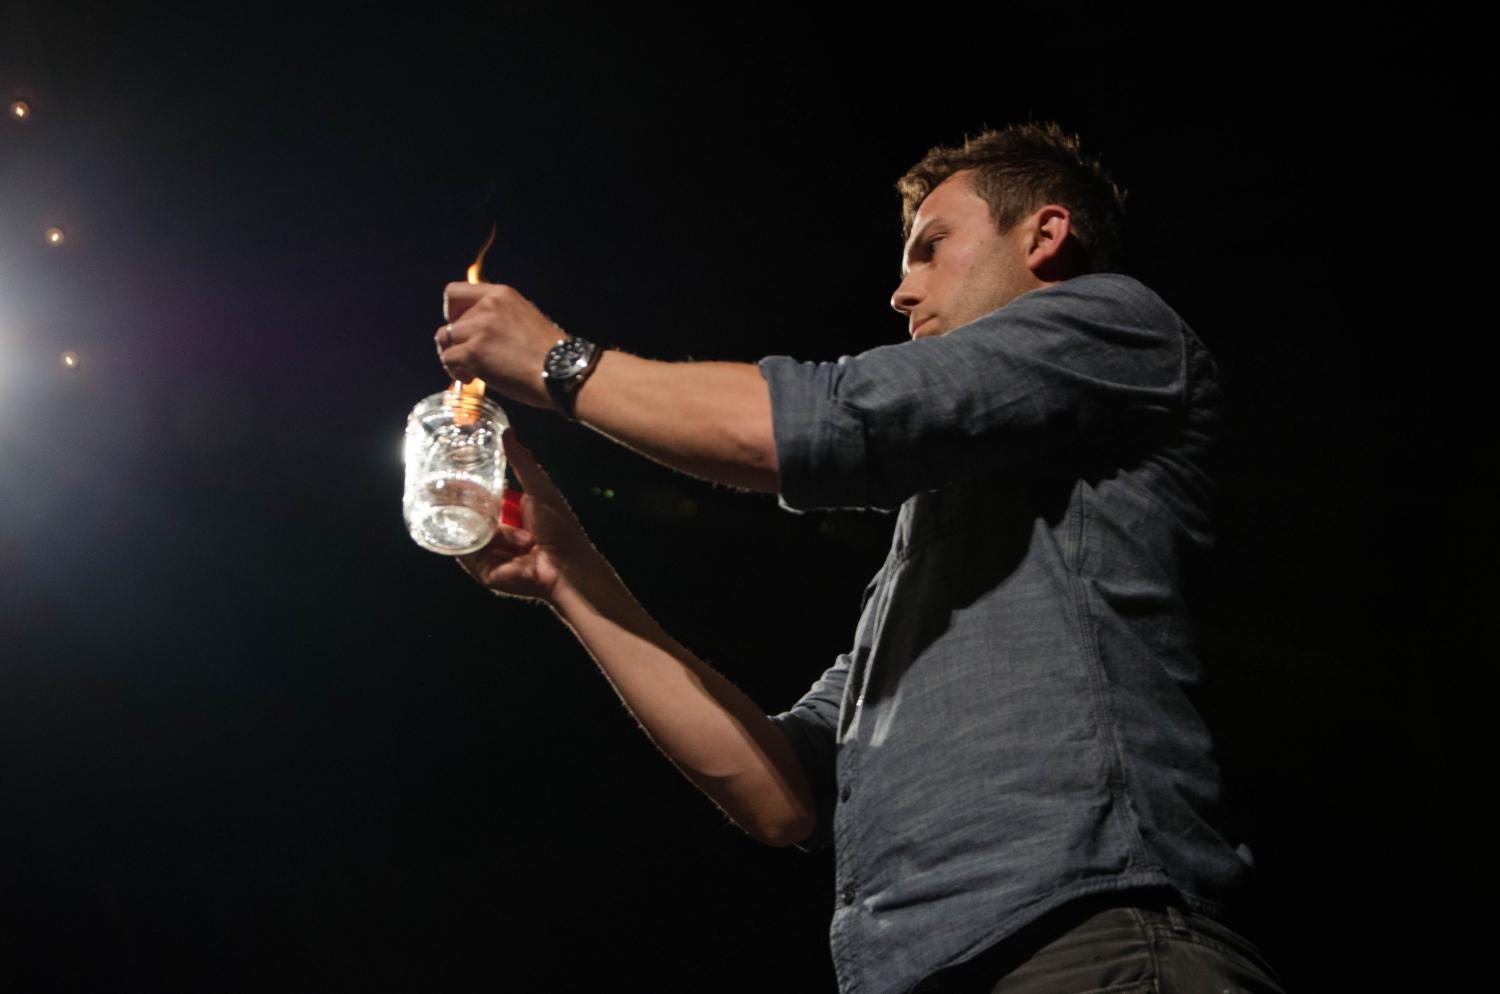 Nate Staniforth sets a dollar bill on fire as a part of his performance at the Englert Theatre on Sept. 11 for the Green Room.